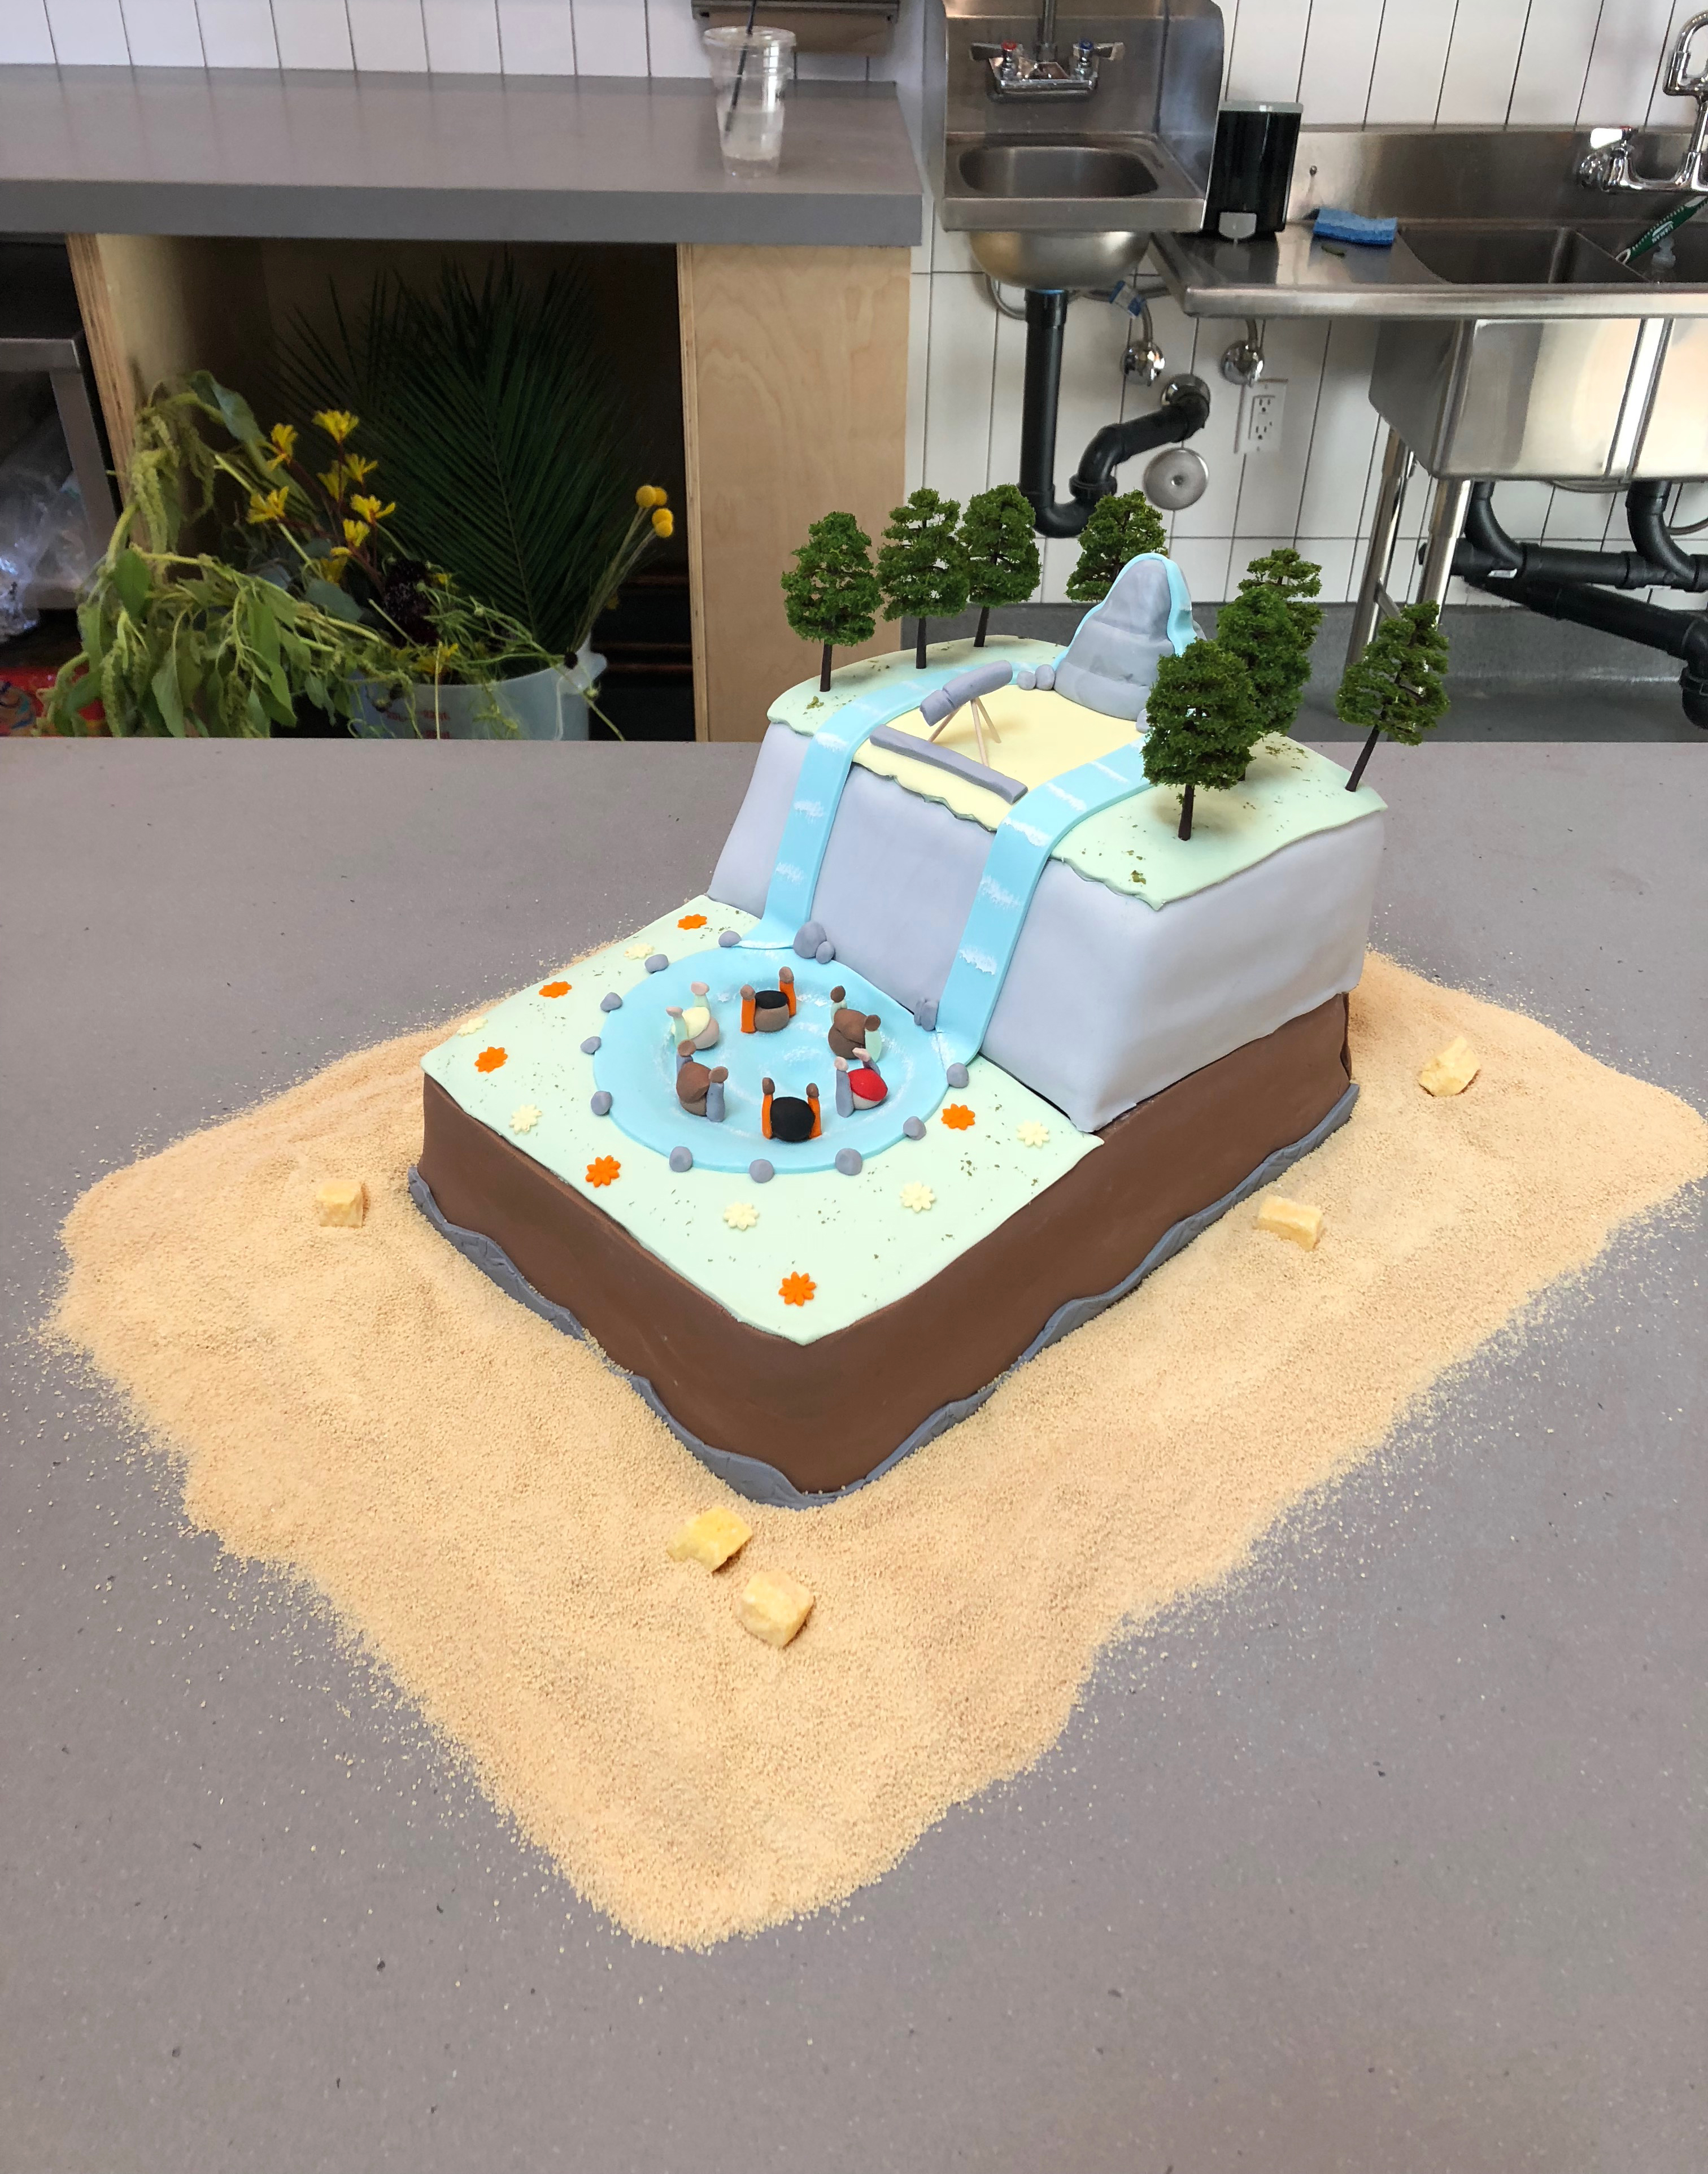 A sculptural cake depicting a landscape with a whirlpool full of drowning people on a gray countertop